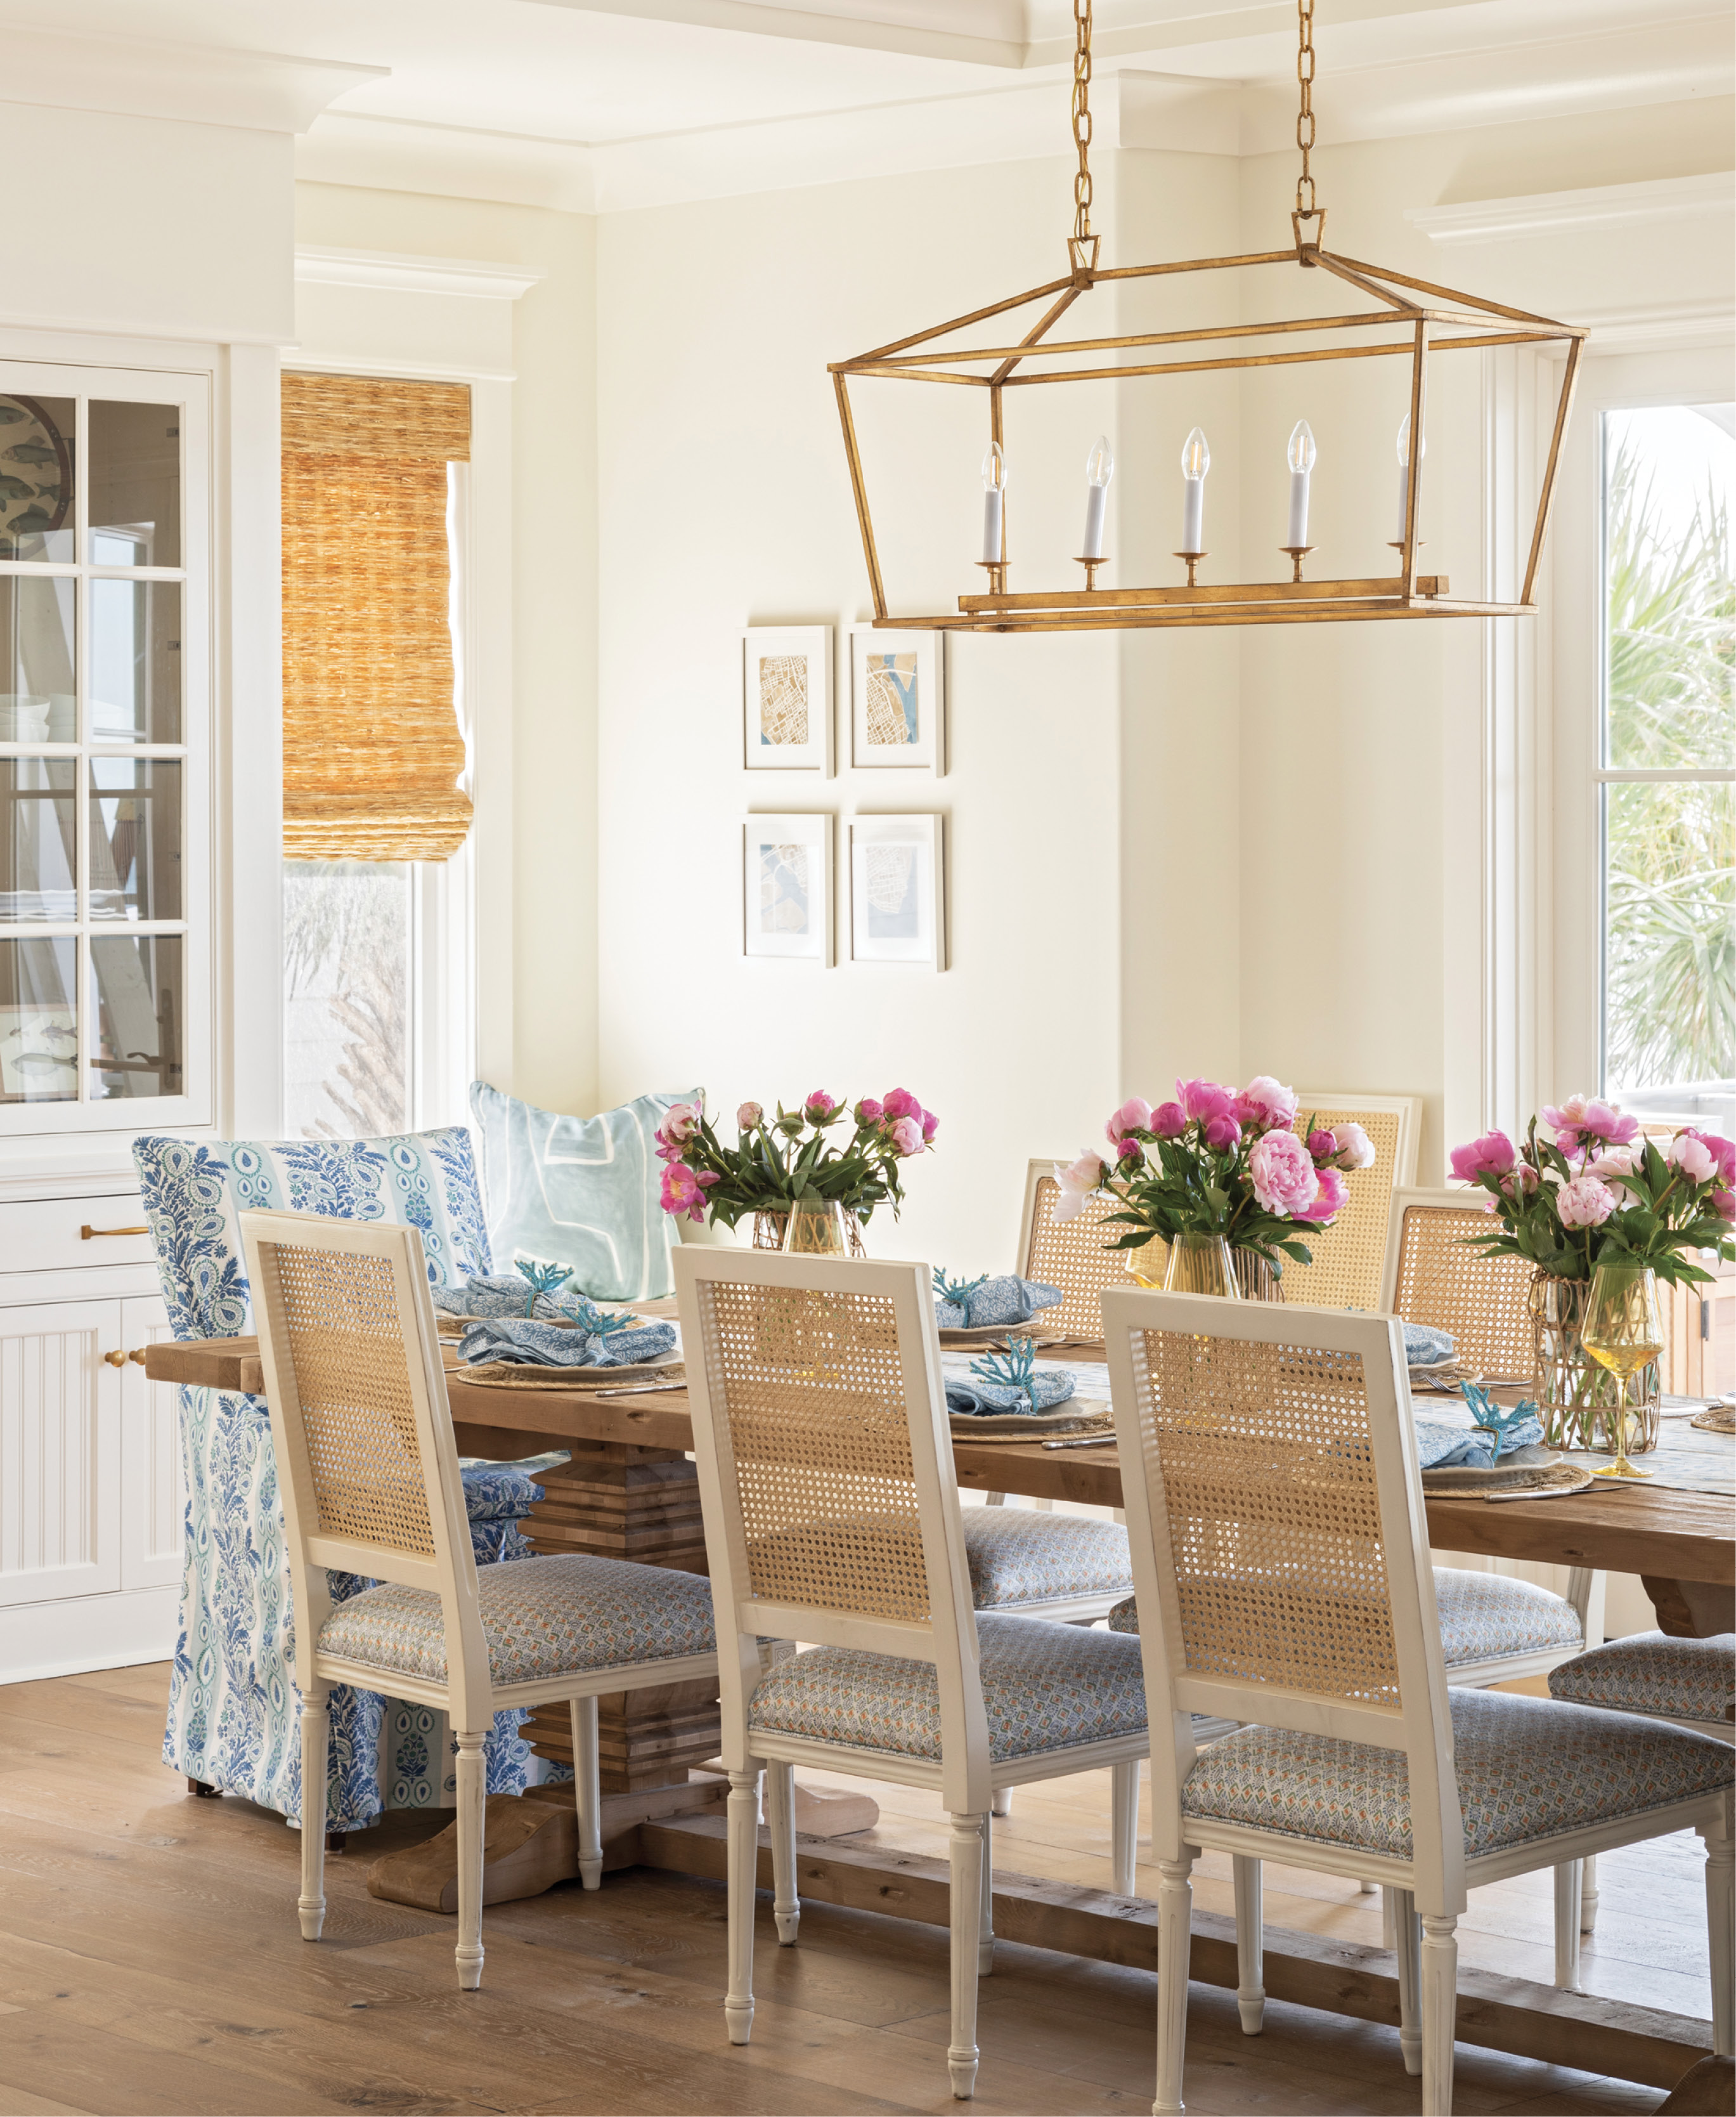 GOOD VIBES: In the dining area, windows were replaced with French doors, flooding the space with natural light and making a more direct thoroughfare to the outdoor kitchen. A fun suite of fabrics—by Rebecca Atwood (cane-back chair seats), Charlotte Gaisford (slipcovered host chairs), and Kelly Wearstler (window seat pillow)—energize the space, which centers around a sweeping Restoration Hardware trestle table.